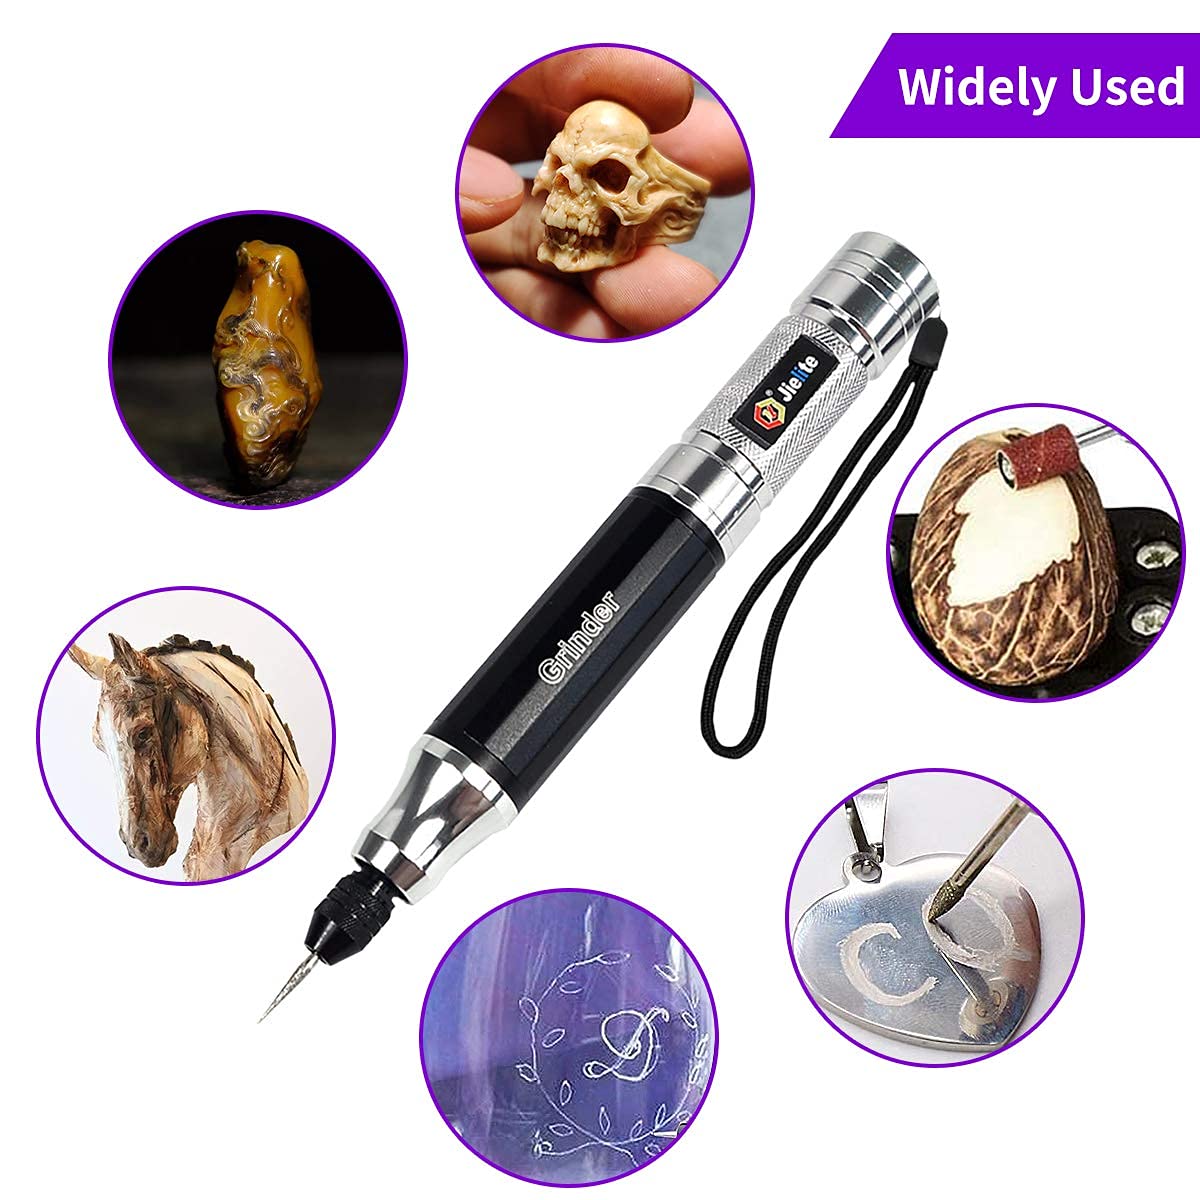 Engraving Pen Portable Electric Engraving Tool Kit, Rechargeable Engraver Machine for Metal Glass Wood Leather Jewellery Carving Drilling Lettering